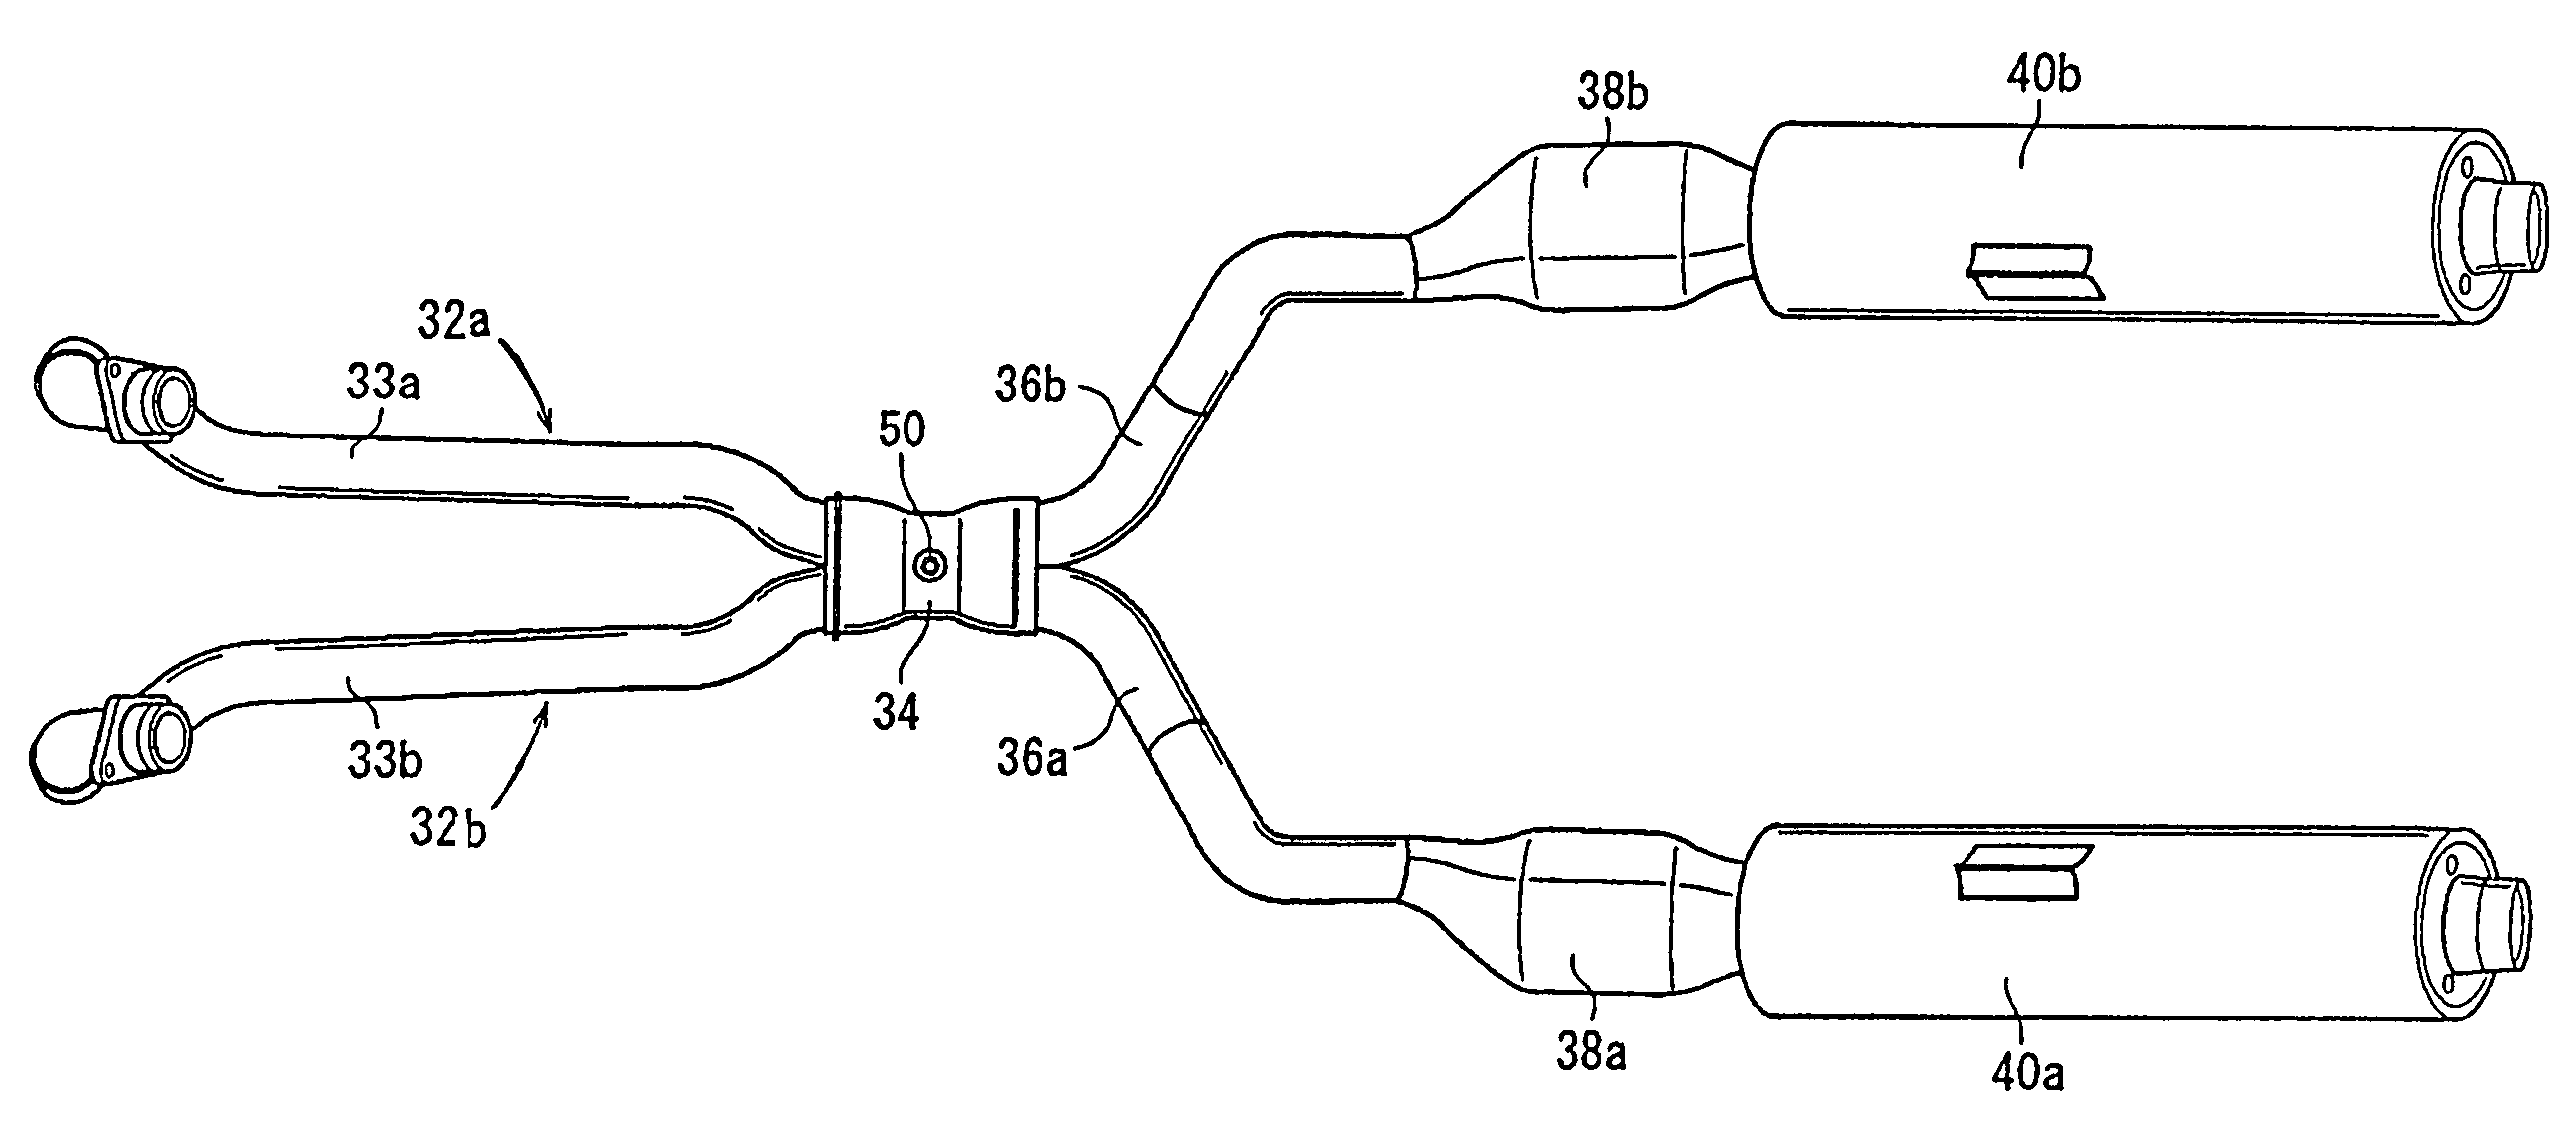 Mounting structure for an air-fuel ratio sensor in a motorcycle, and exhaust subassembly including same